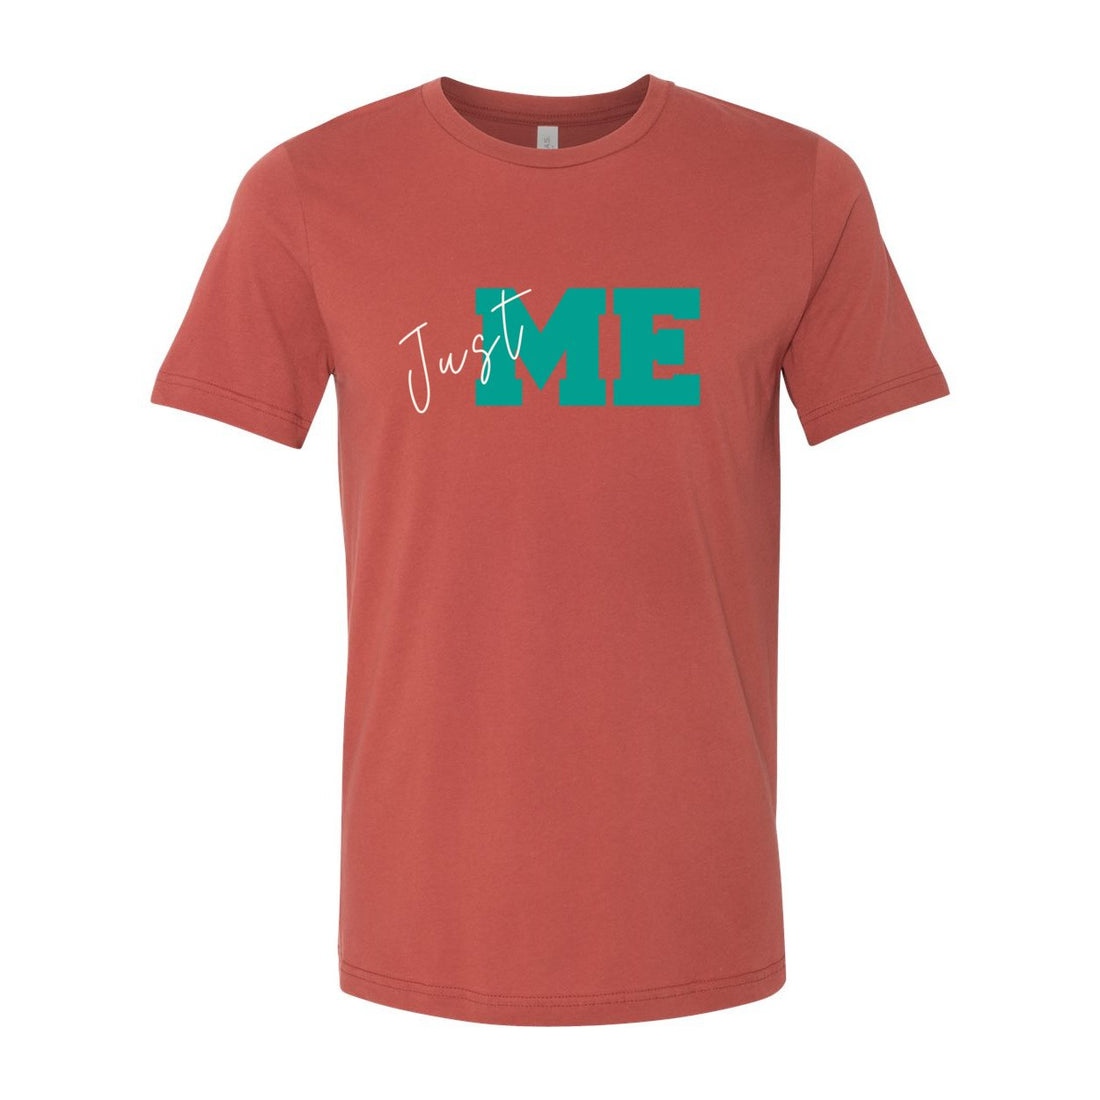 Just ME Short Sleeve Jersey Tee - T-Shirts - Positively Sassy - Just ME Short Sleeve Jersey Tee